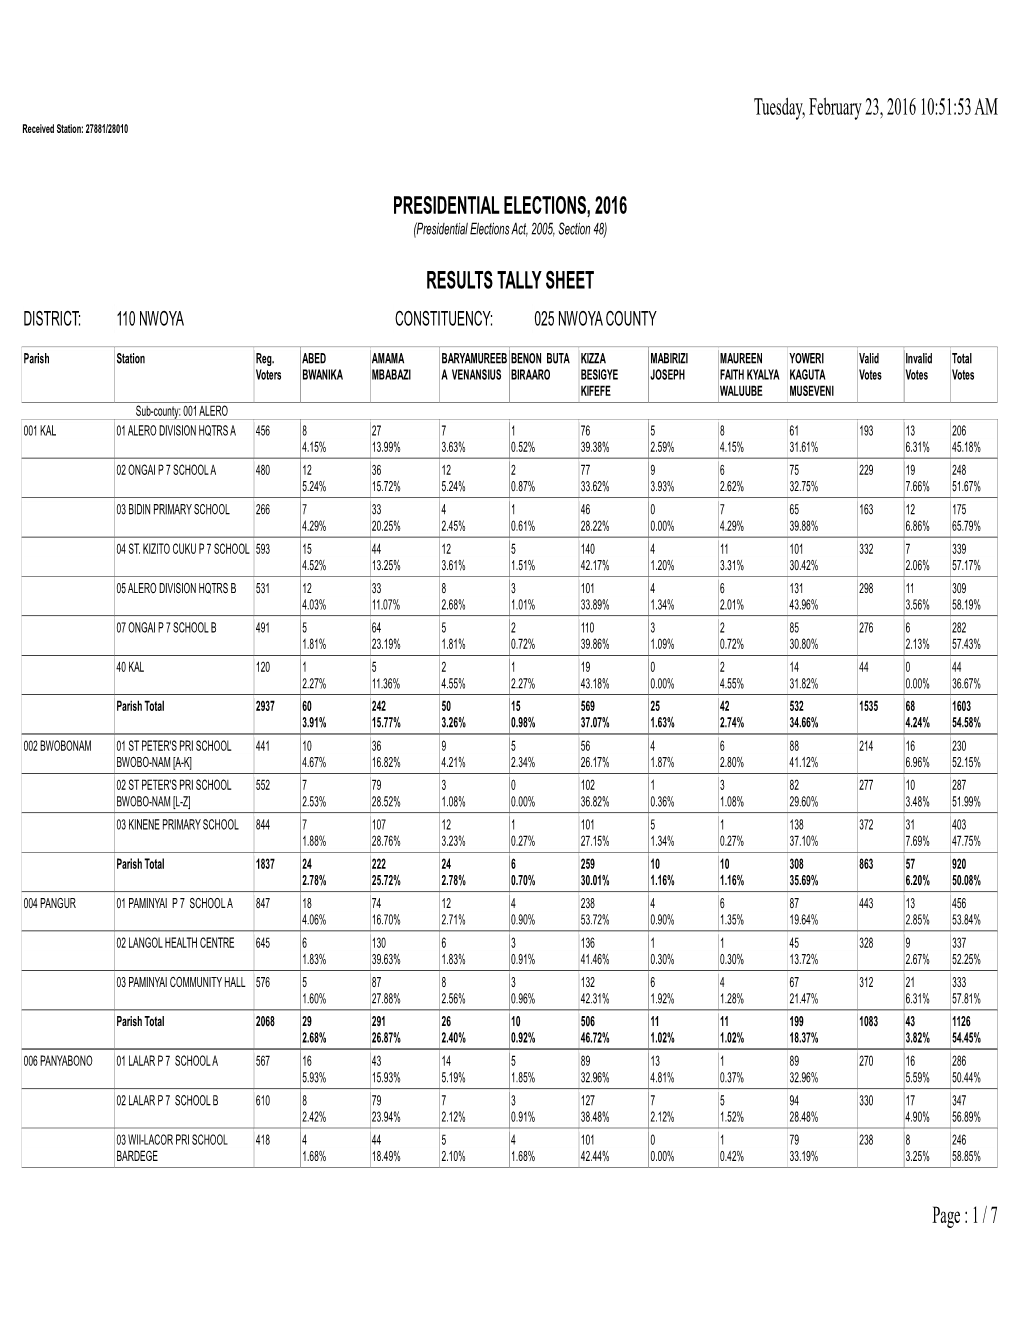 1 / 7 Presidential Elections, 2016 Results Tally Sheet